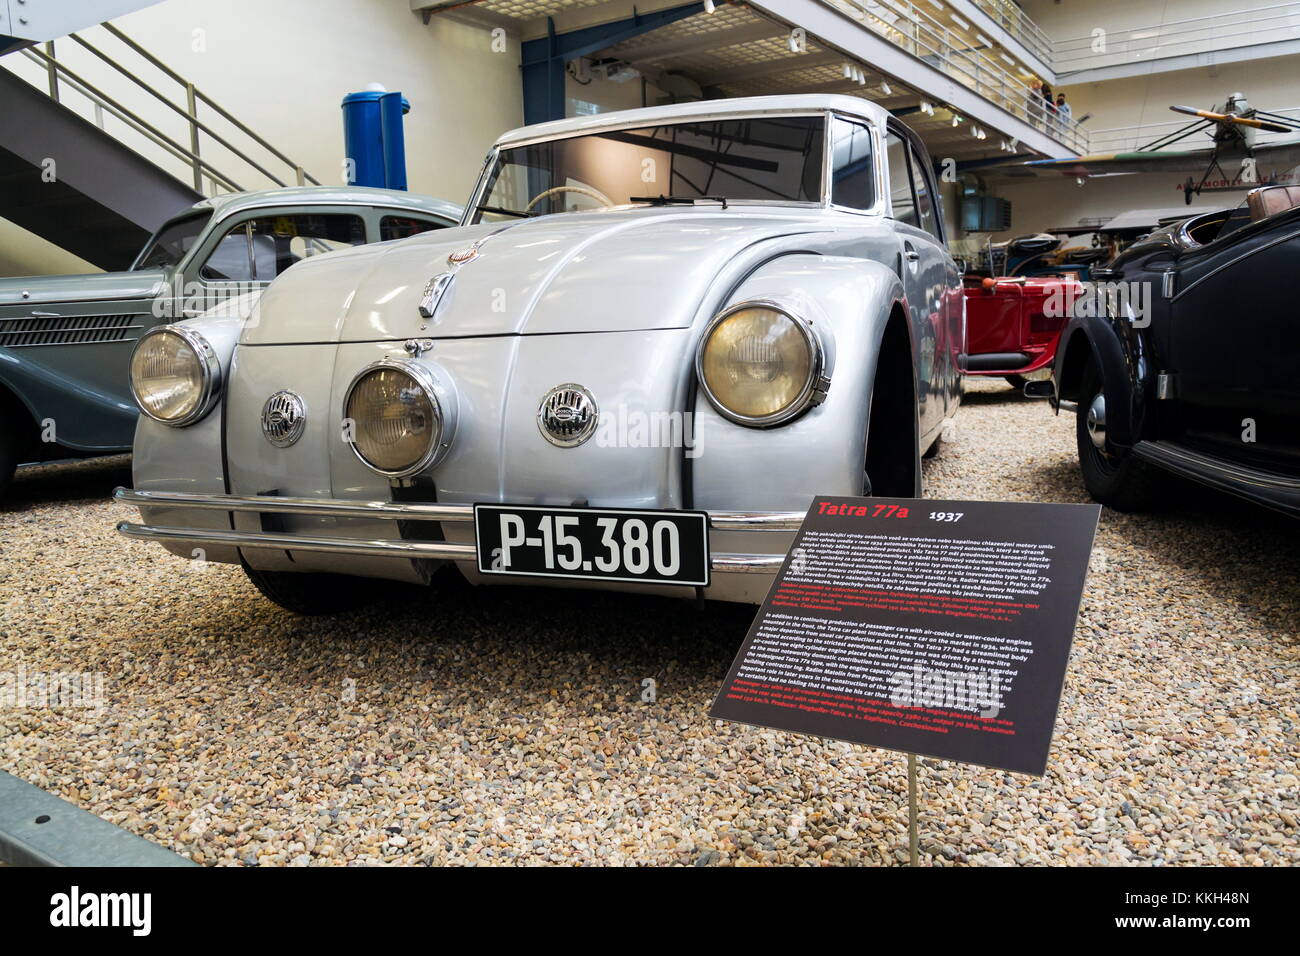 PRAGUE, CZECH REPUBLIC - NOVEMBER 10: Car Tatra 77 A from year 1937 stands in National technical museum on November 10, 2017 in Prague, Czech Republic Stock Photo